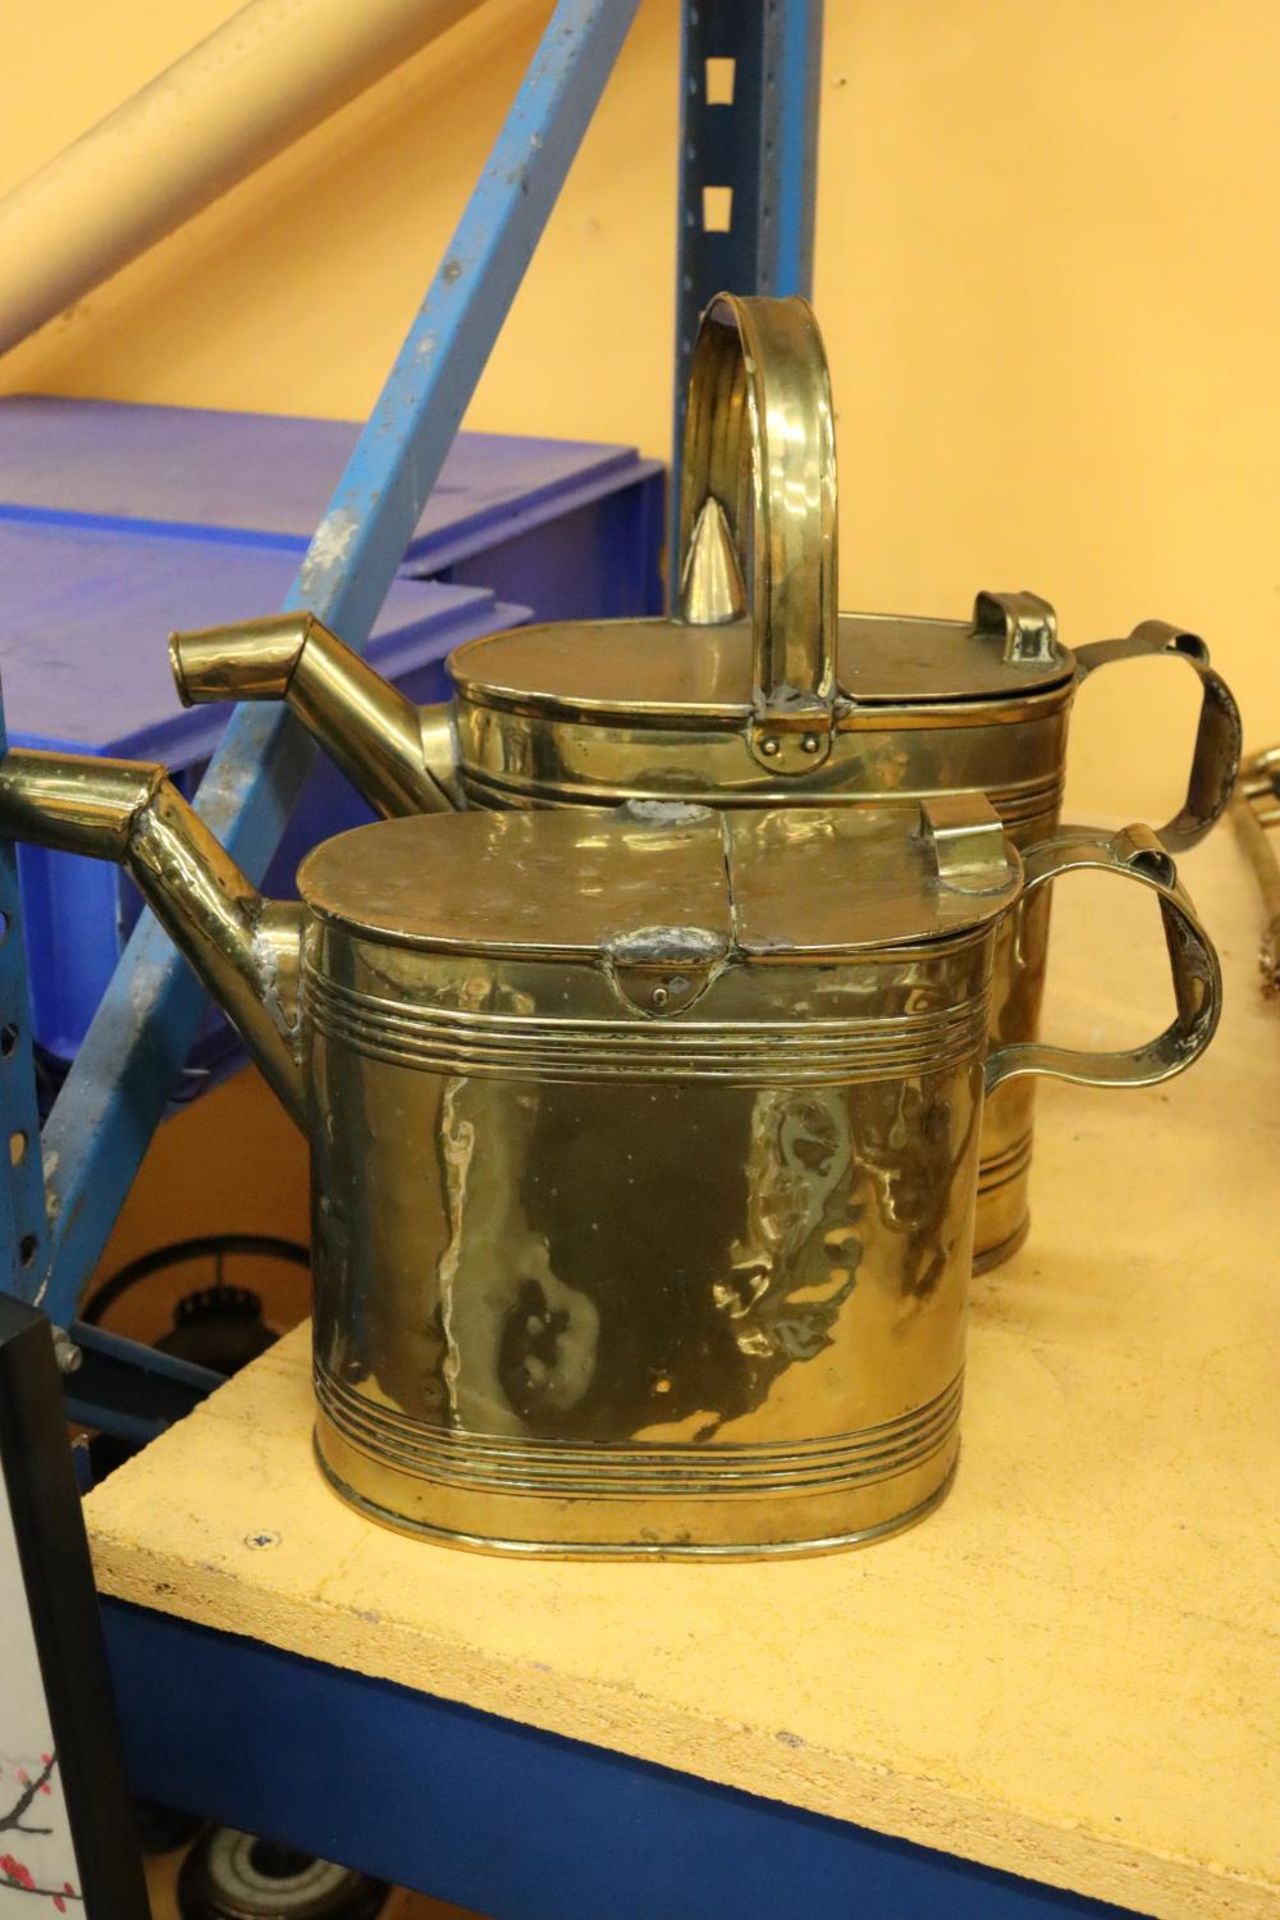 TWO BRASS WATERING CANS, ONE MISSING THE HANDLE